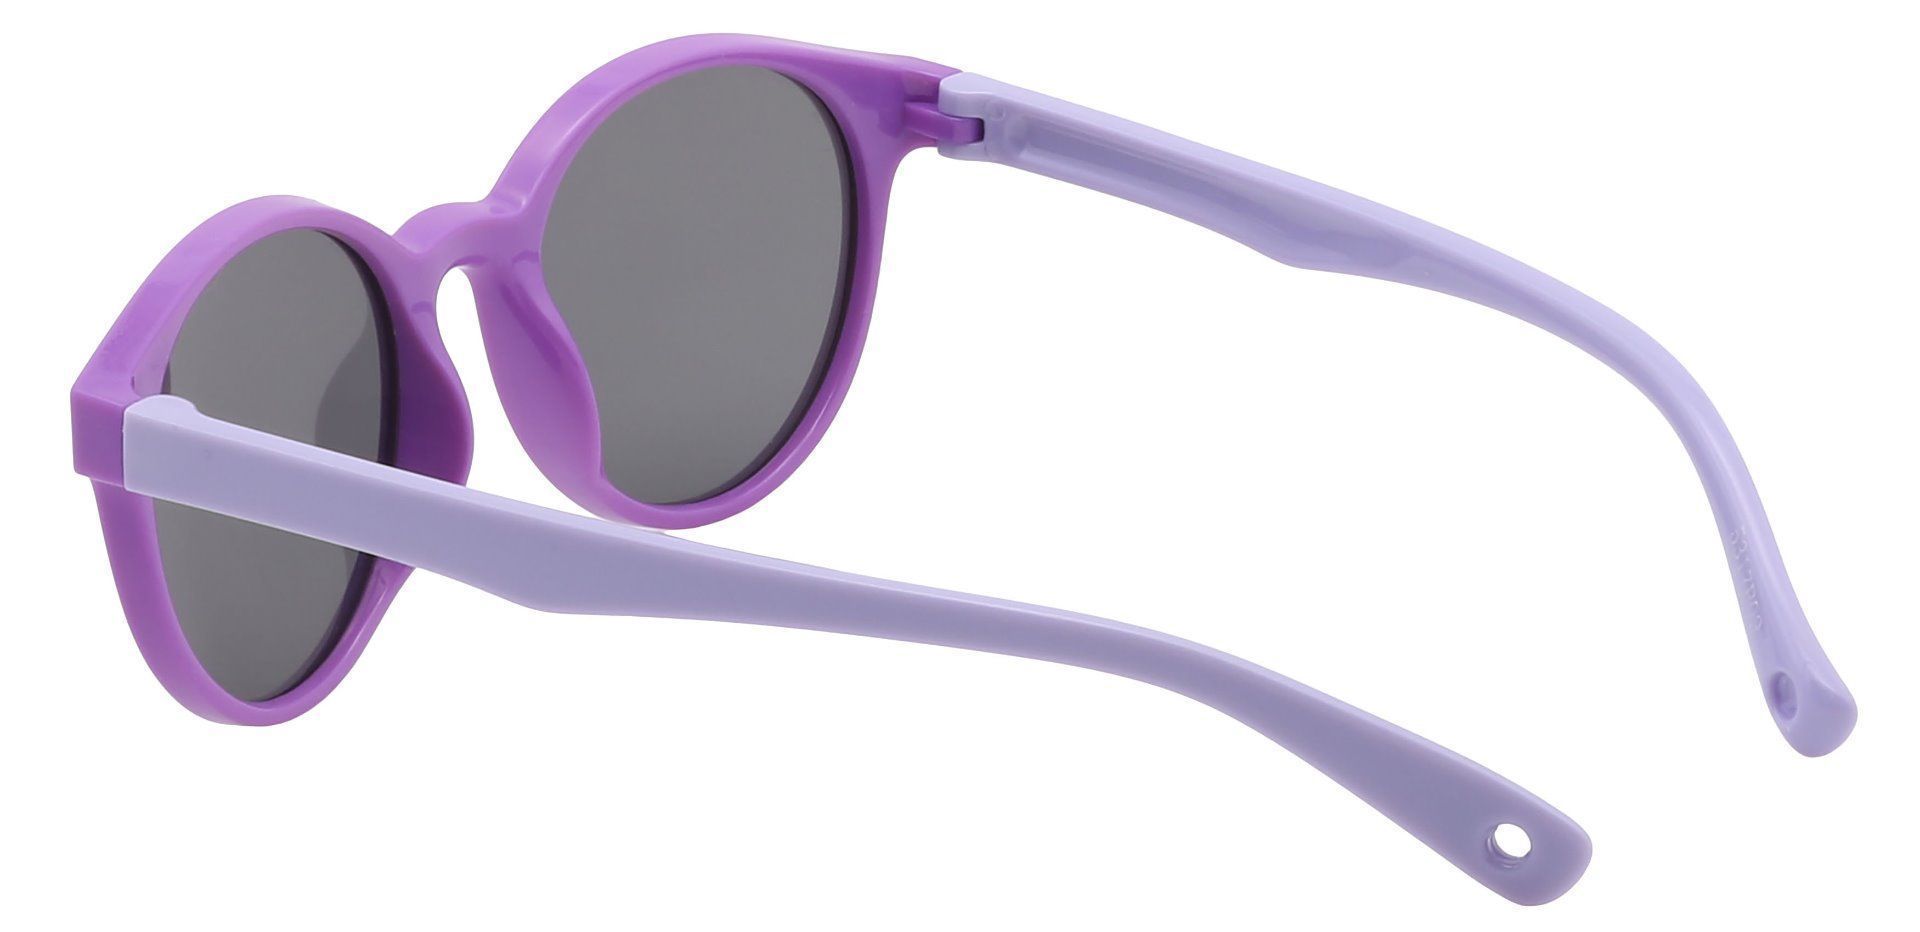 Harris Round Single Vision Sunglasses - Purple Frame With Gray Lenses